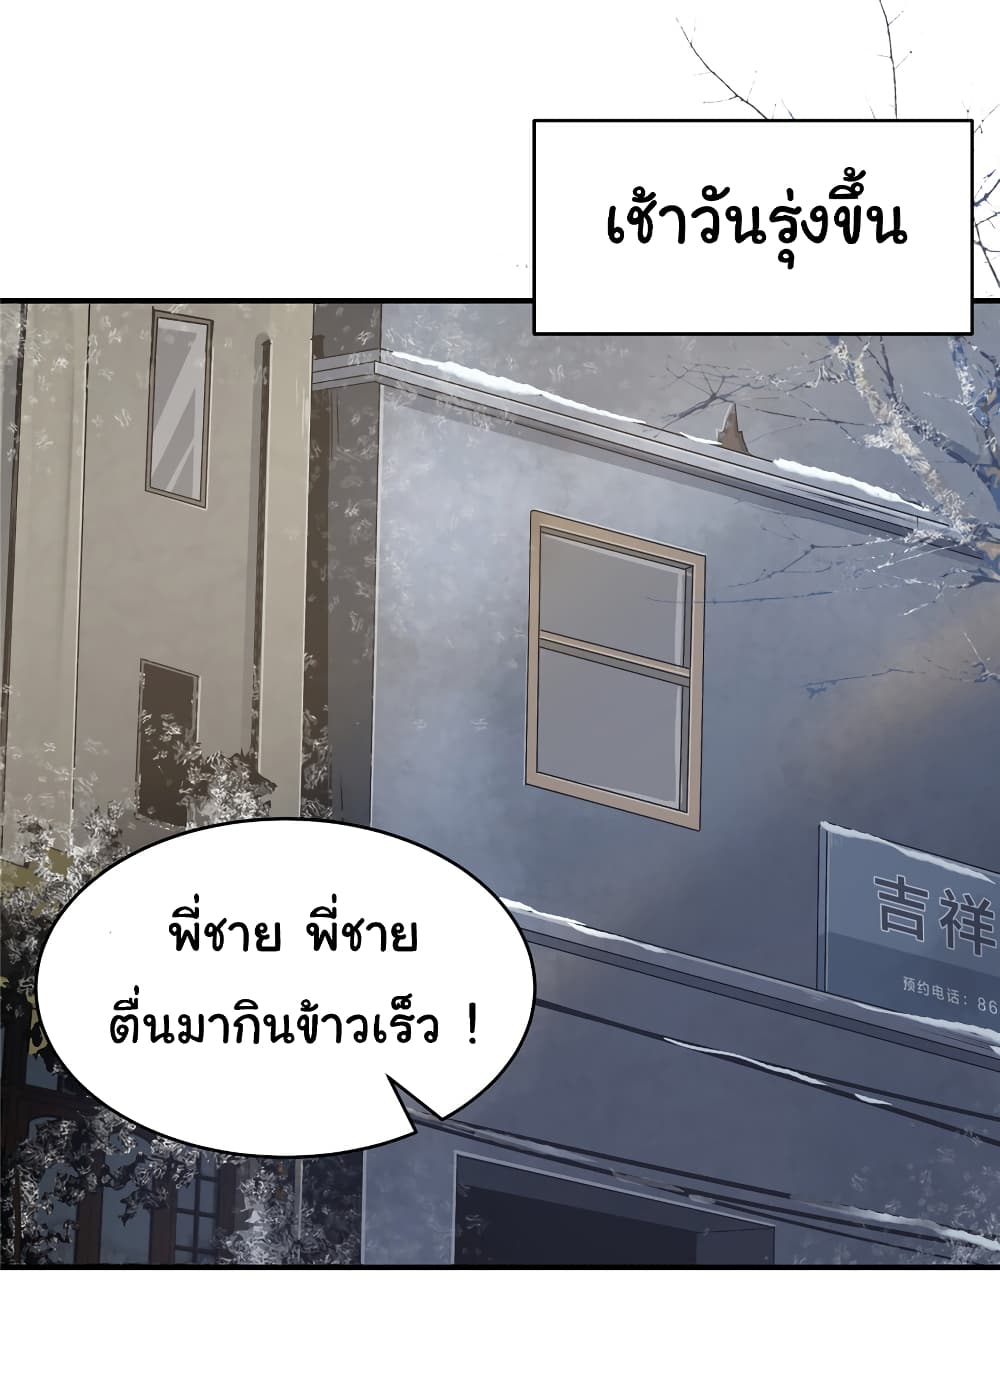 Live Steadily, Donโ€t Wave เธ•เธญเธเธ—เธตเน 25 (28)